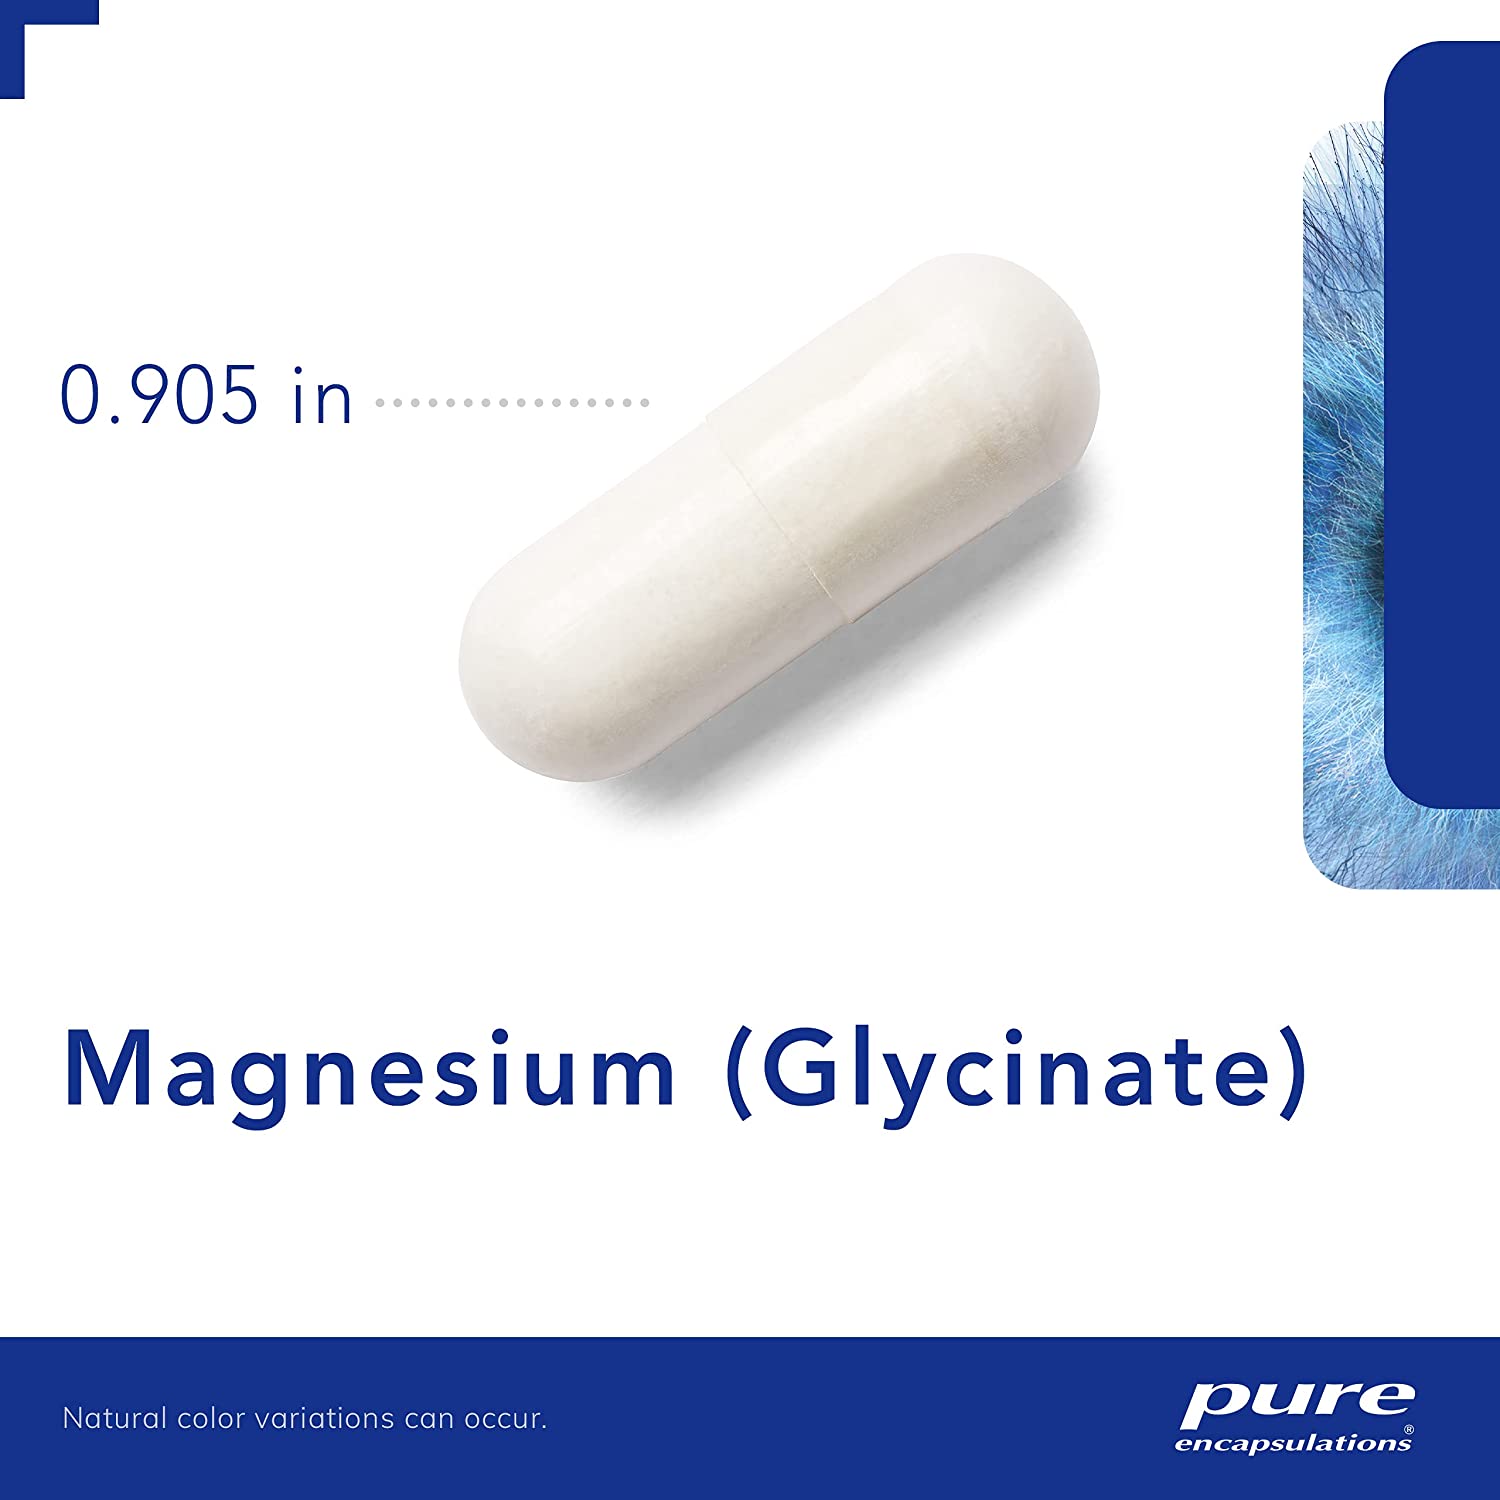 Pure Encapsulations Magnesium (Glycinate) - Supplement to Support Stress Relief, Sleep, Heart Health, Nerves, Muscles, and Metabolism* - with Magnesium Glycinate - 360 Capsules